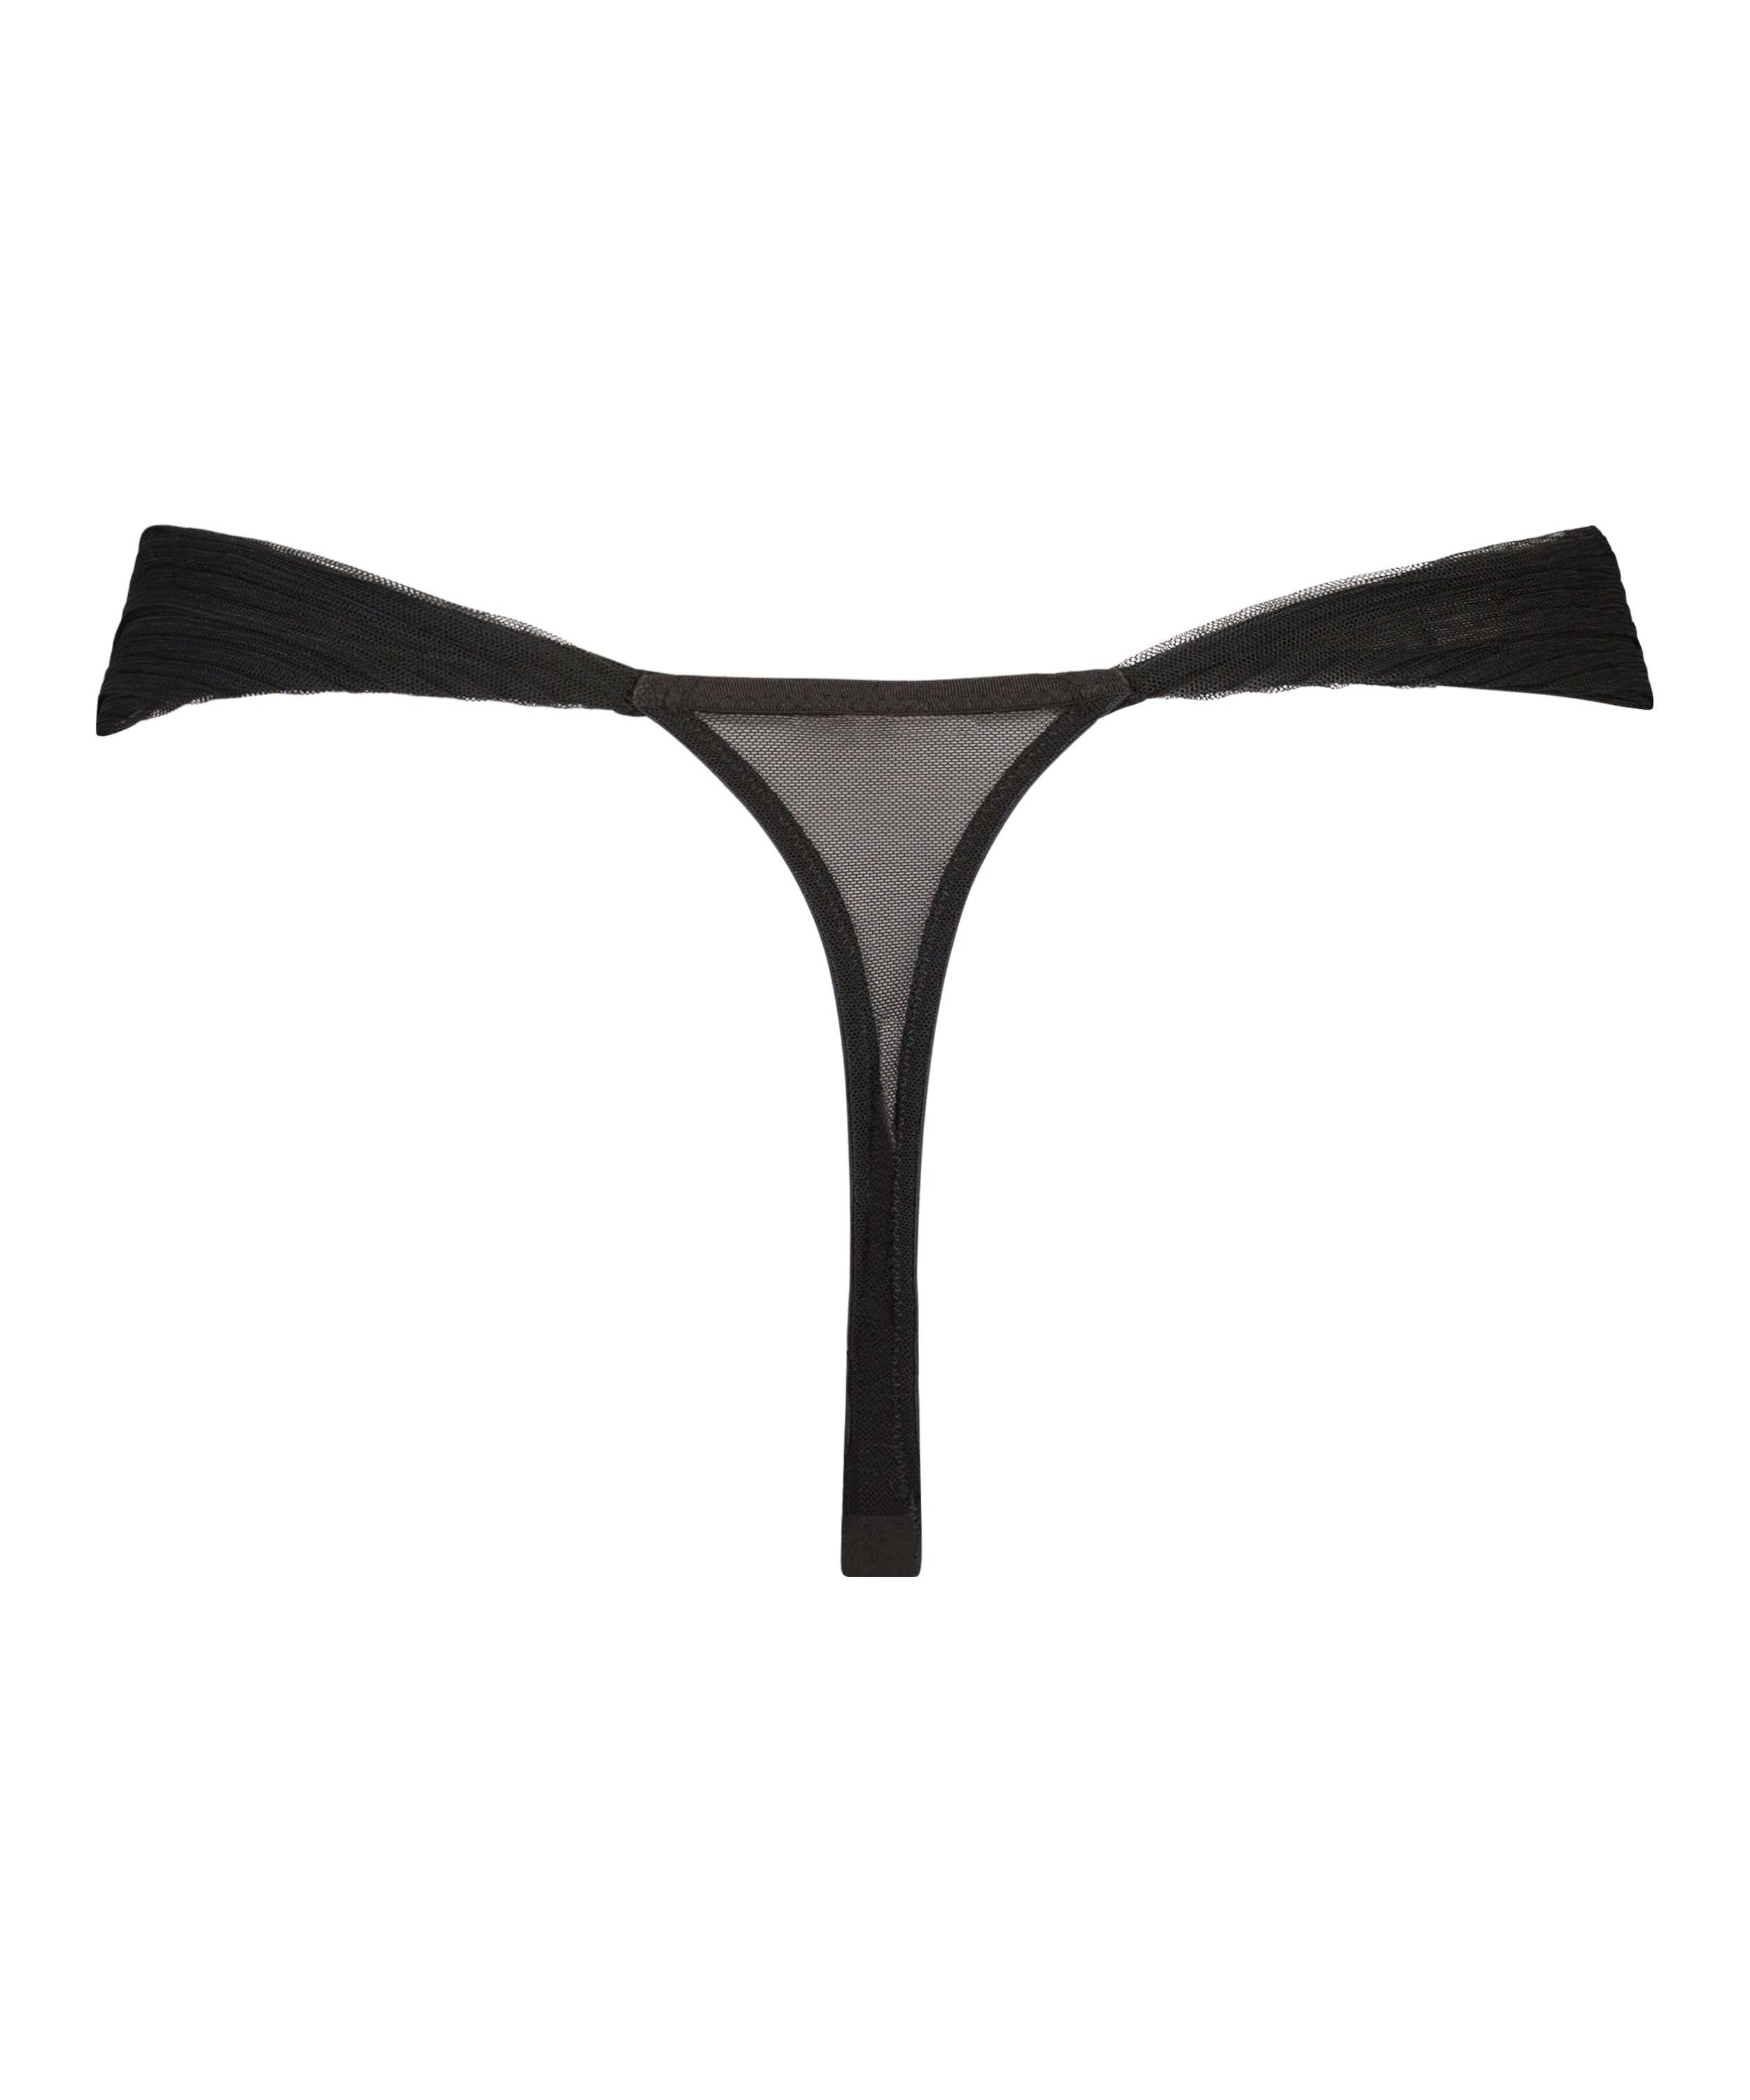 Elissa Knickers Lucy Hale for £15 - Thongs & G-Strings - Hunkemöller